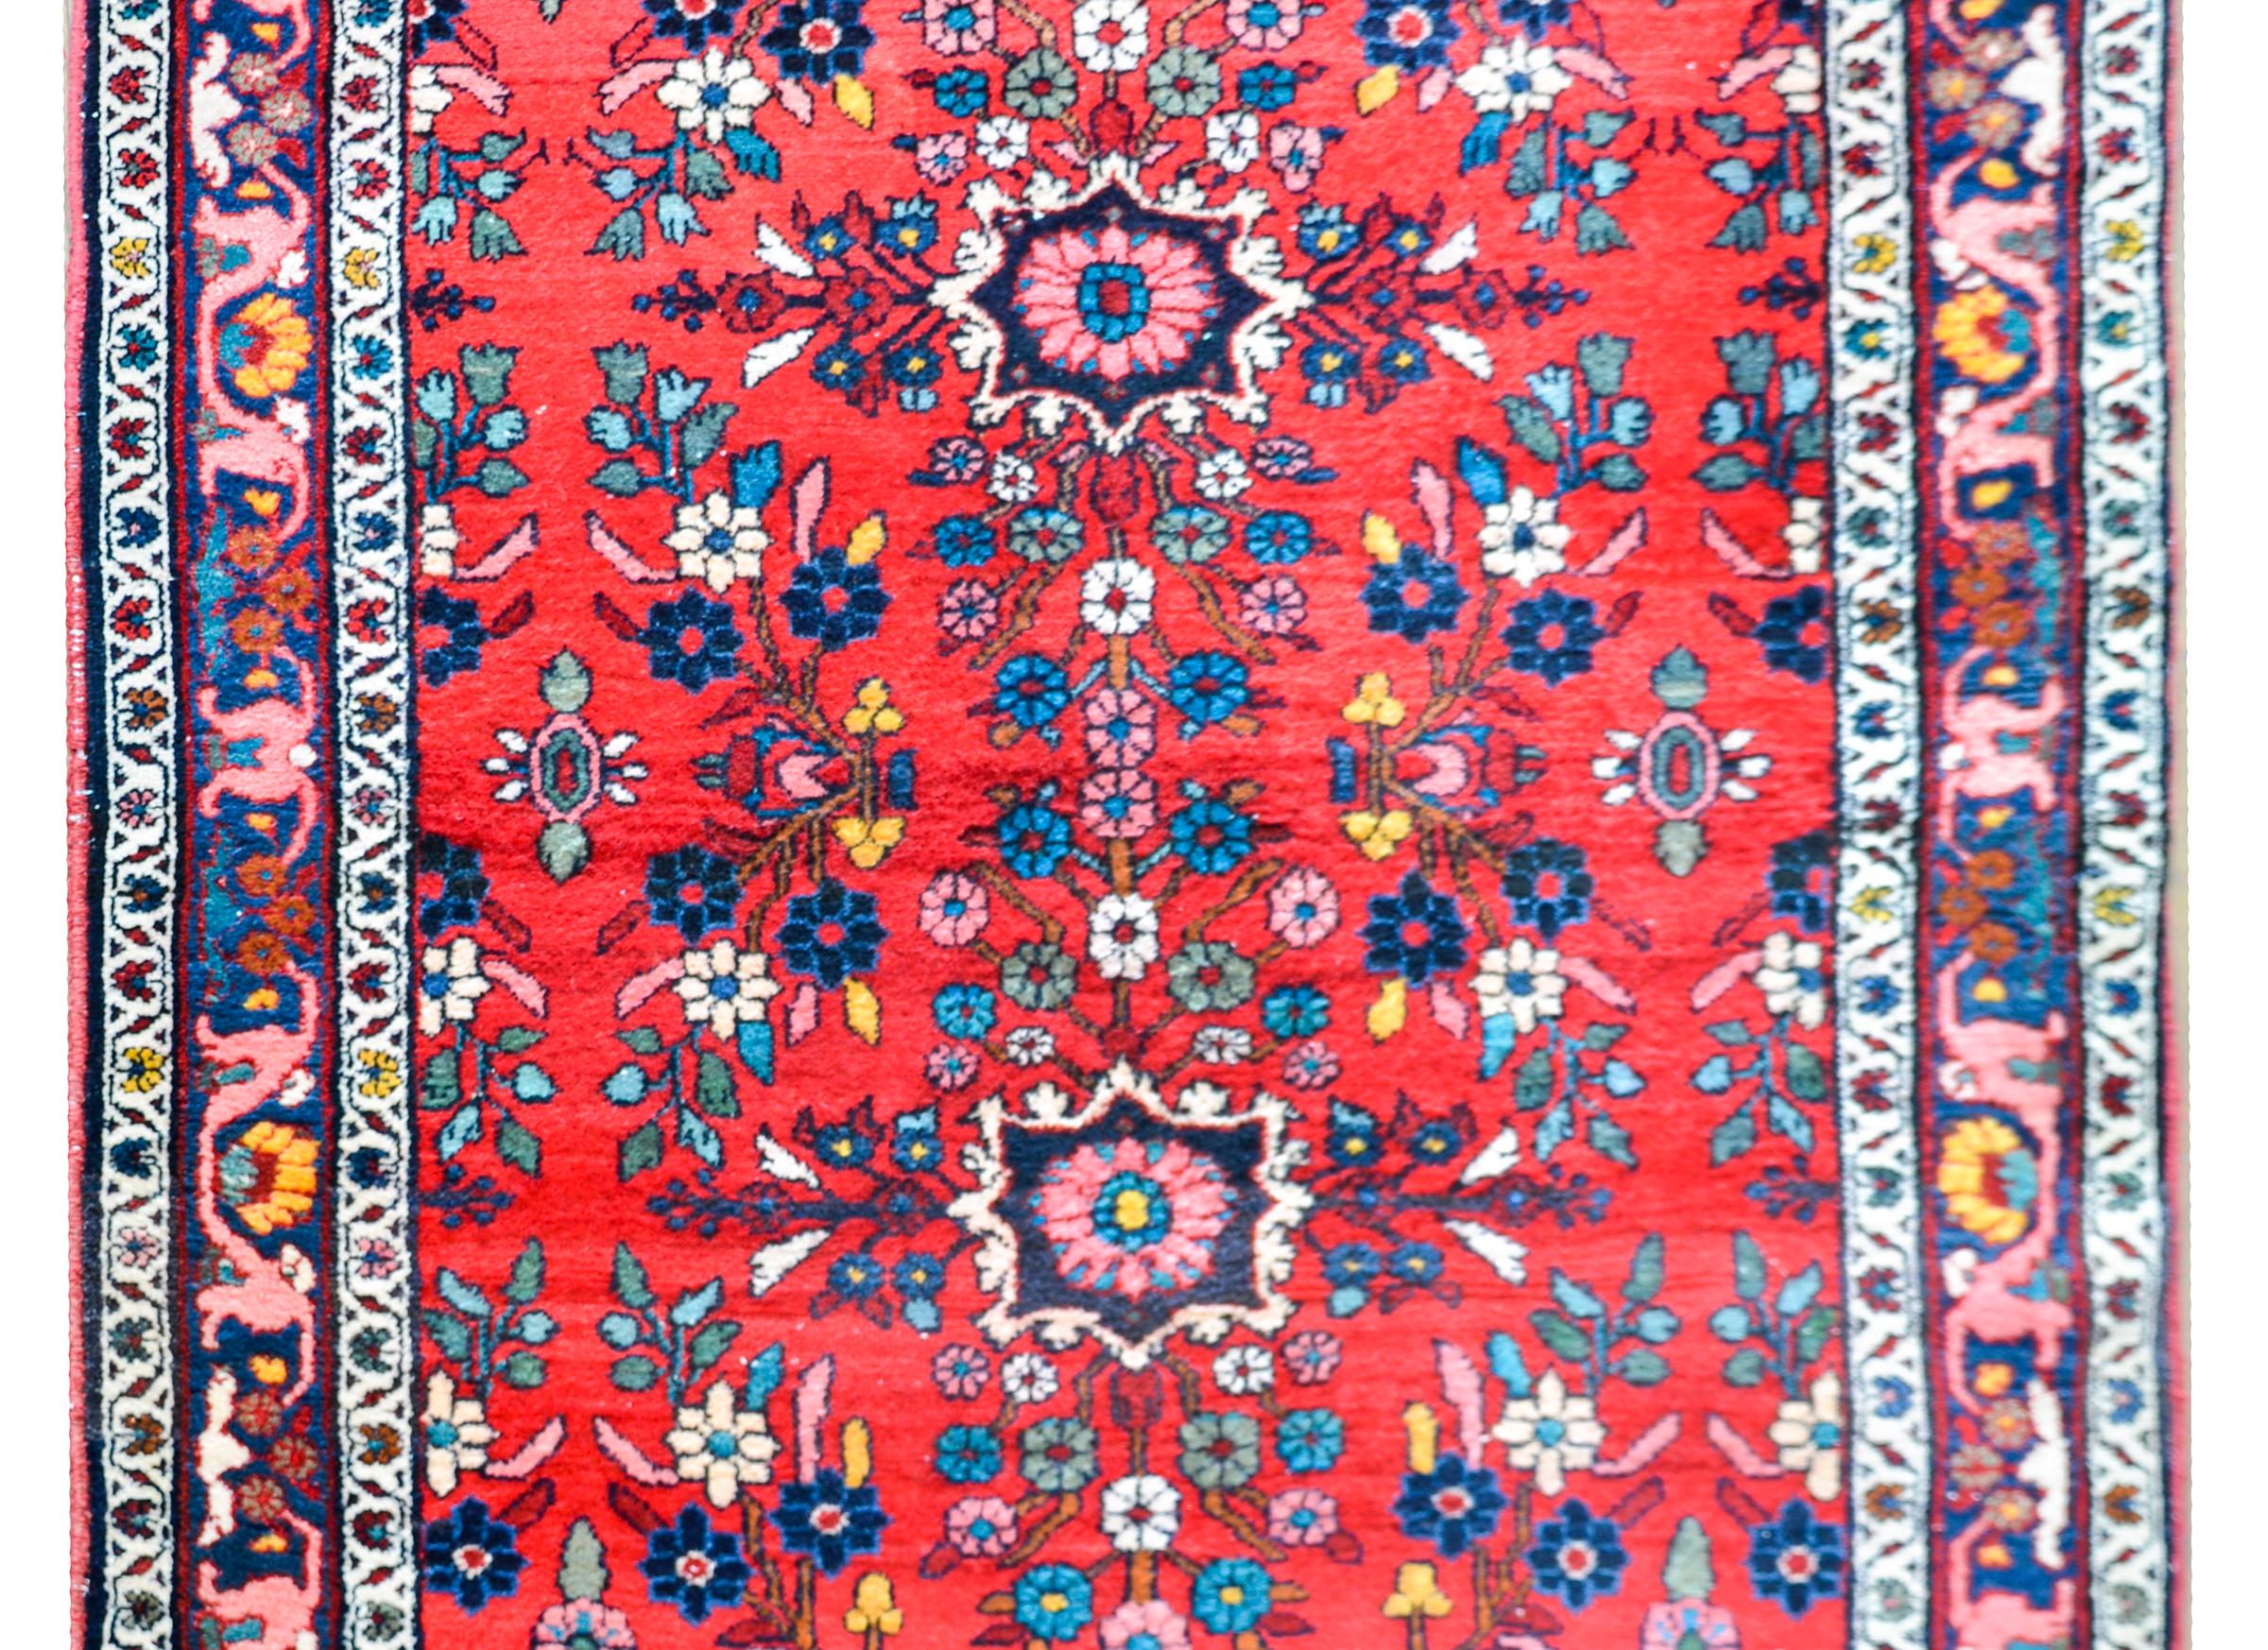 A wonderful early 20th century Persian Dargazin rug with two small stylized floral medallions amidst a field of more flowers and set against a crimson background. The border is simple with three petite floral patterned stripes.